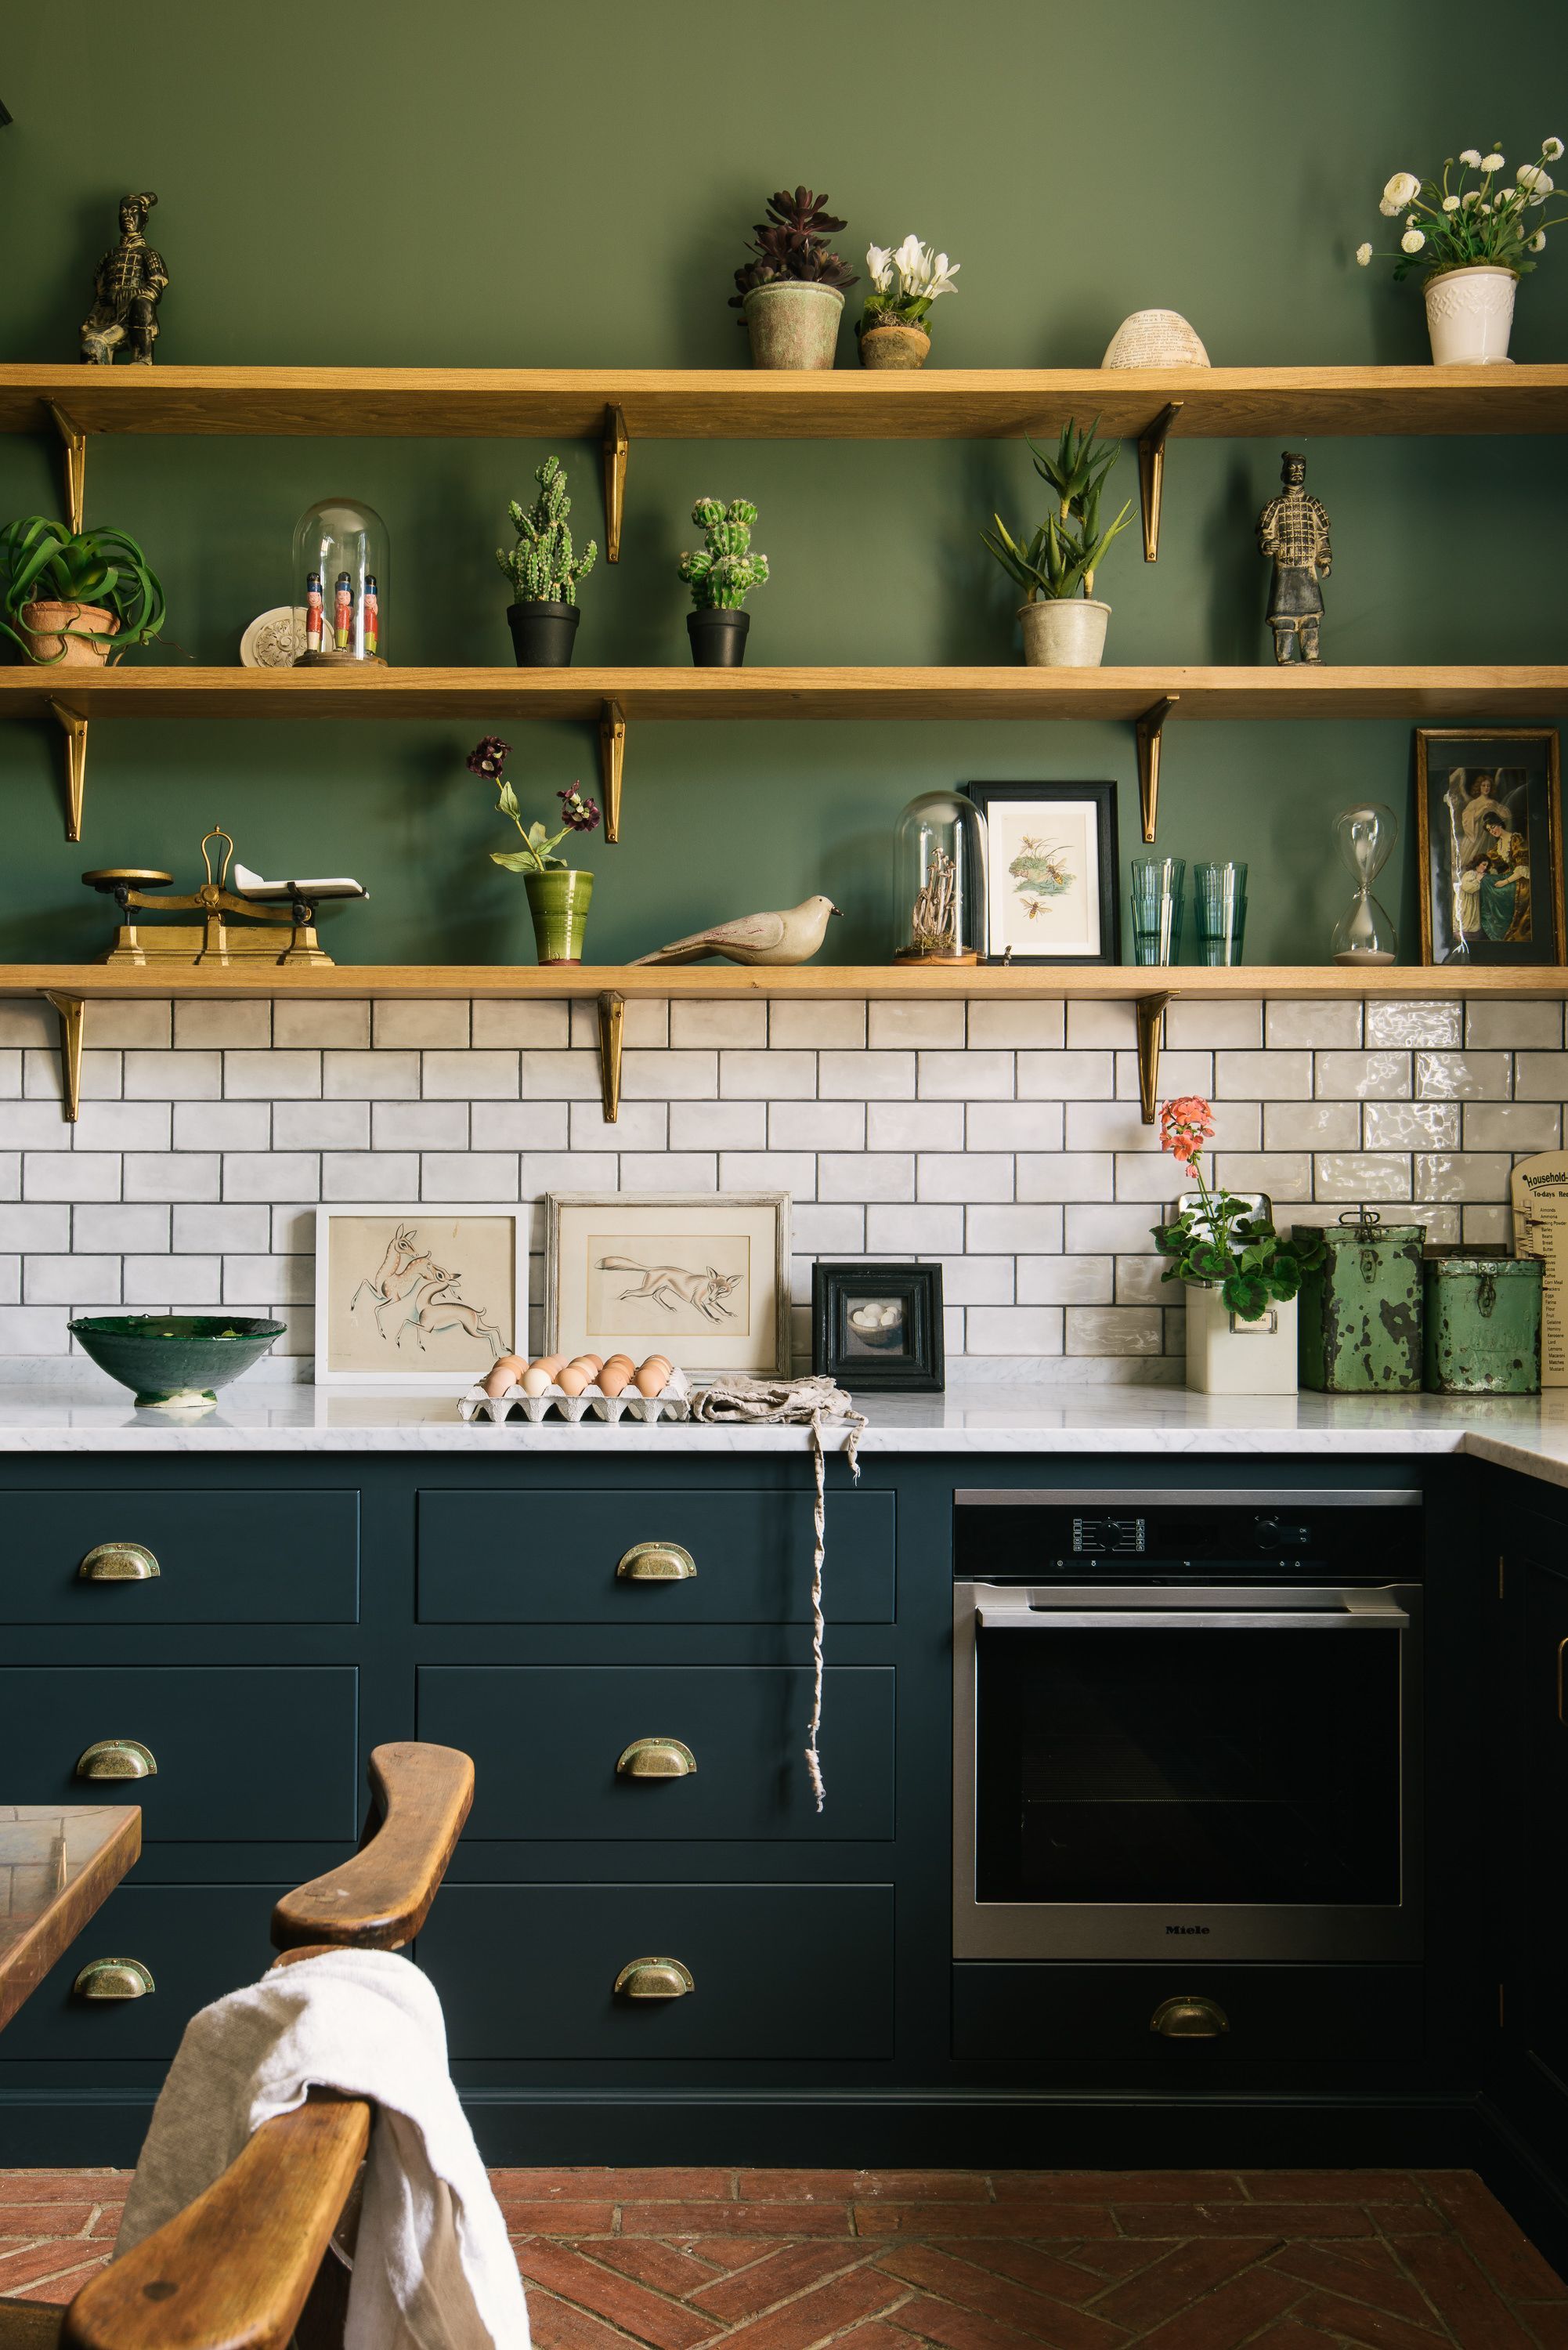 Open shelves, Pantry Blue cupboards and subway tiles -   14 plants House kitchen ideas